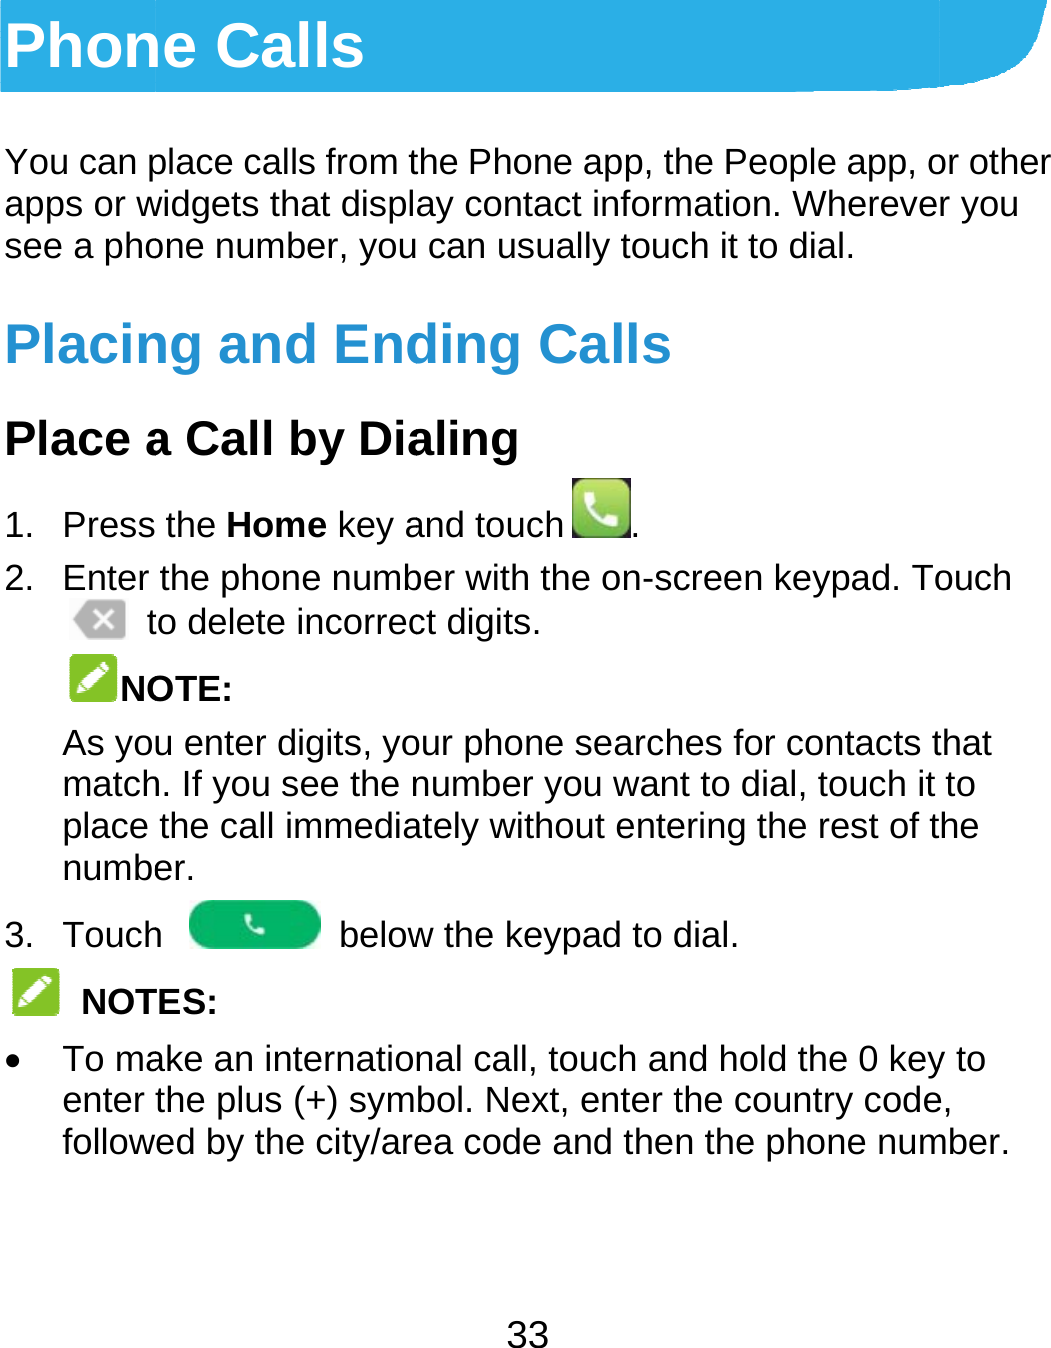  PhonYou can papps or wsee a phoPlacinPlace a1. Press2. Enter  tNOAs yomatchplace numbe3. Touch NOT To maenter followne Calls place calls from twidgets that displone number, young and Enda Call by Dia the Home key athe phone numbto delete incorrecOTE: u enter digits, yoh. If you see the nthe call immediaer.  h  belowTES: ake an internatiothe plus (+) symed by the city/are33 the Phone app, thay contact inform can usually toucding Callsaling and touch .ber with the on-scct digits. our phone searchnumber you wanately without entew the keypad to dnal call, touch anbol. Next, enter tea code and thenhe People app, omation. Wherevech it to dial. creen keypad. Tohes for contacts tt to dial, touch it ering the rest of tdial. nd hold the 0 keythe country coden the phone numor other r you ouch that to he y to e, mber. 